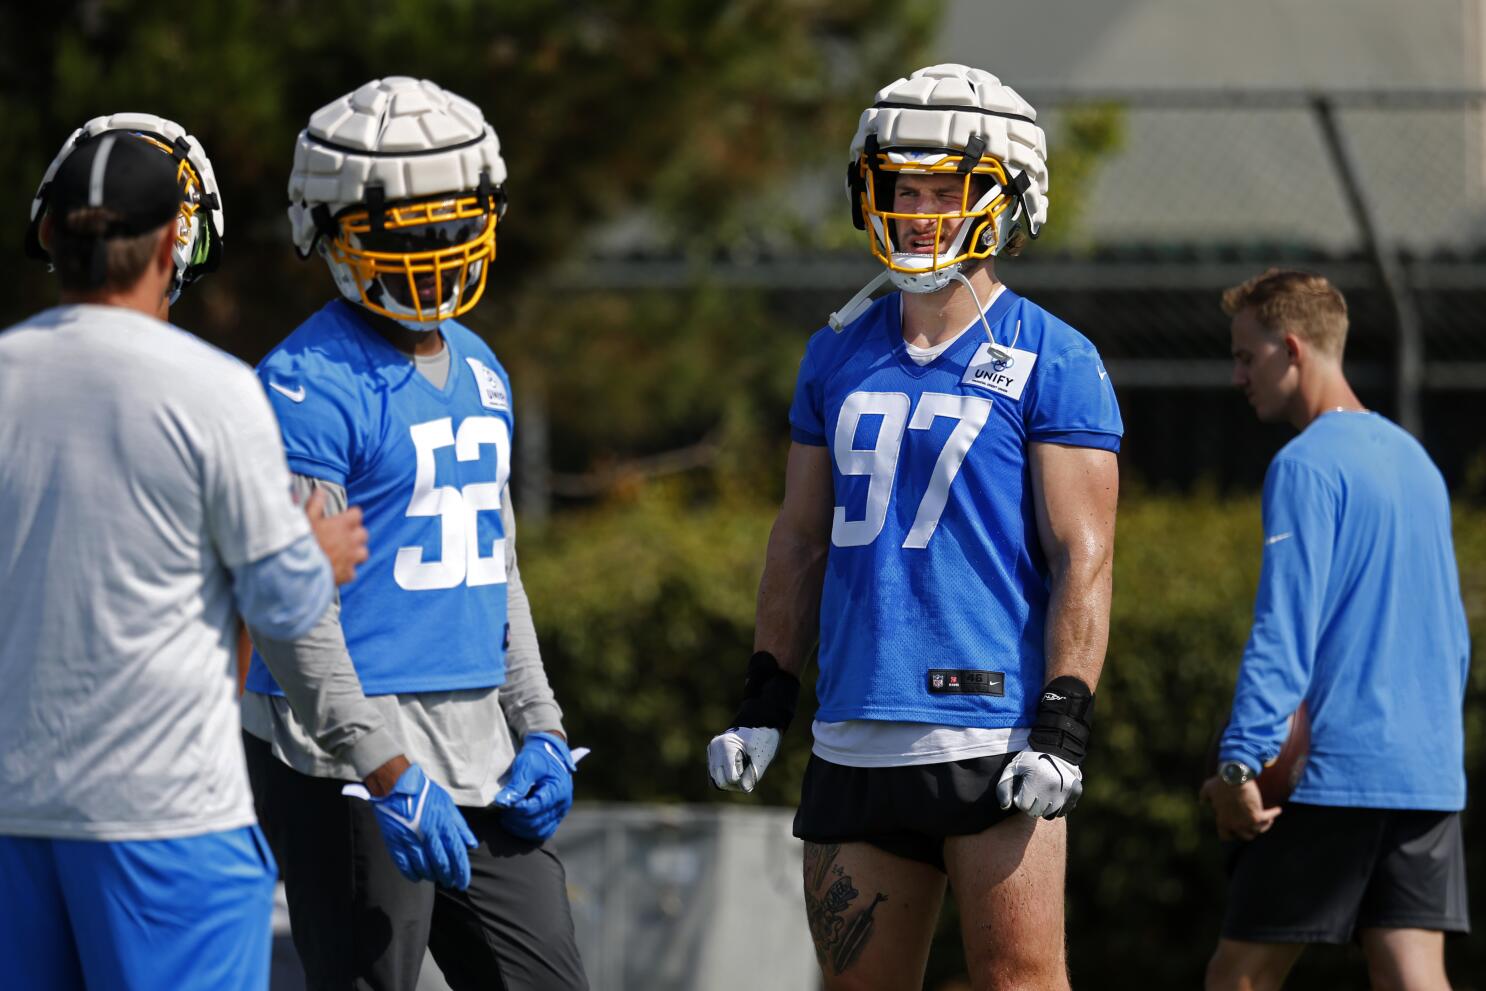 Chargers Training Camp: Joey Bosa predicts a 'close bond' with Khalil Mack  - Bolts From The Blue